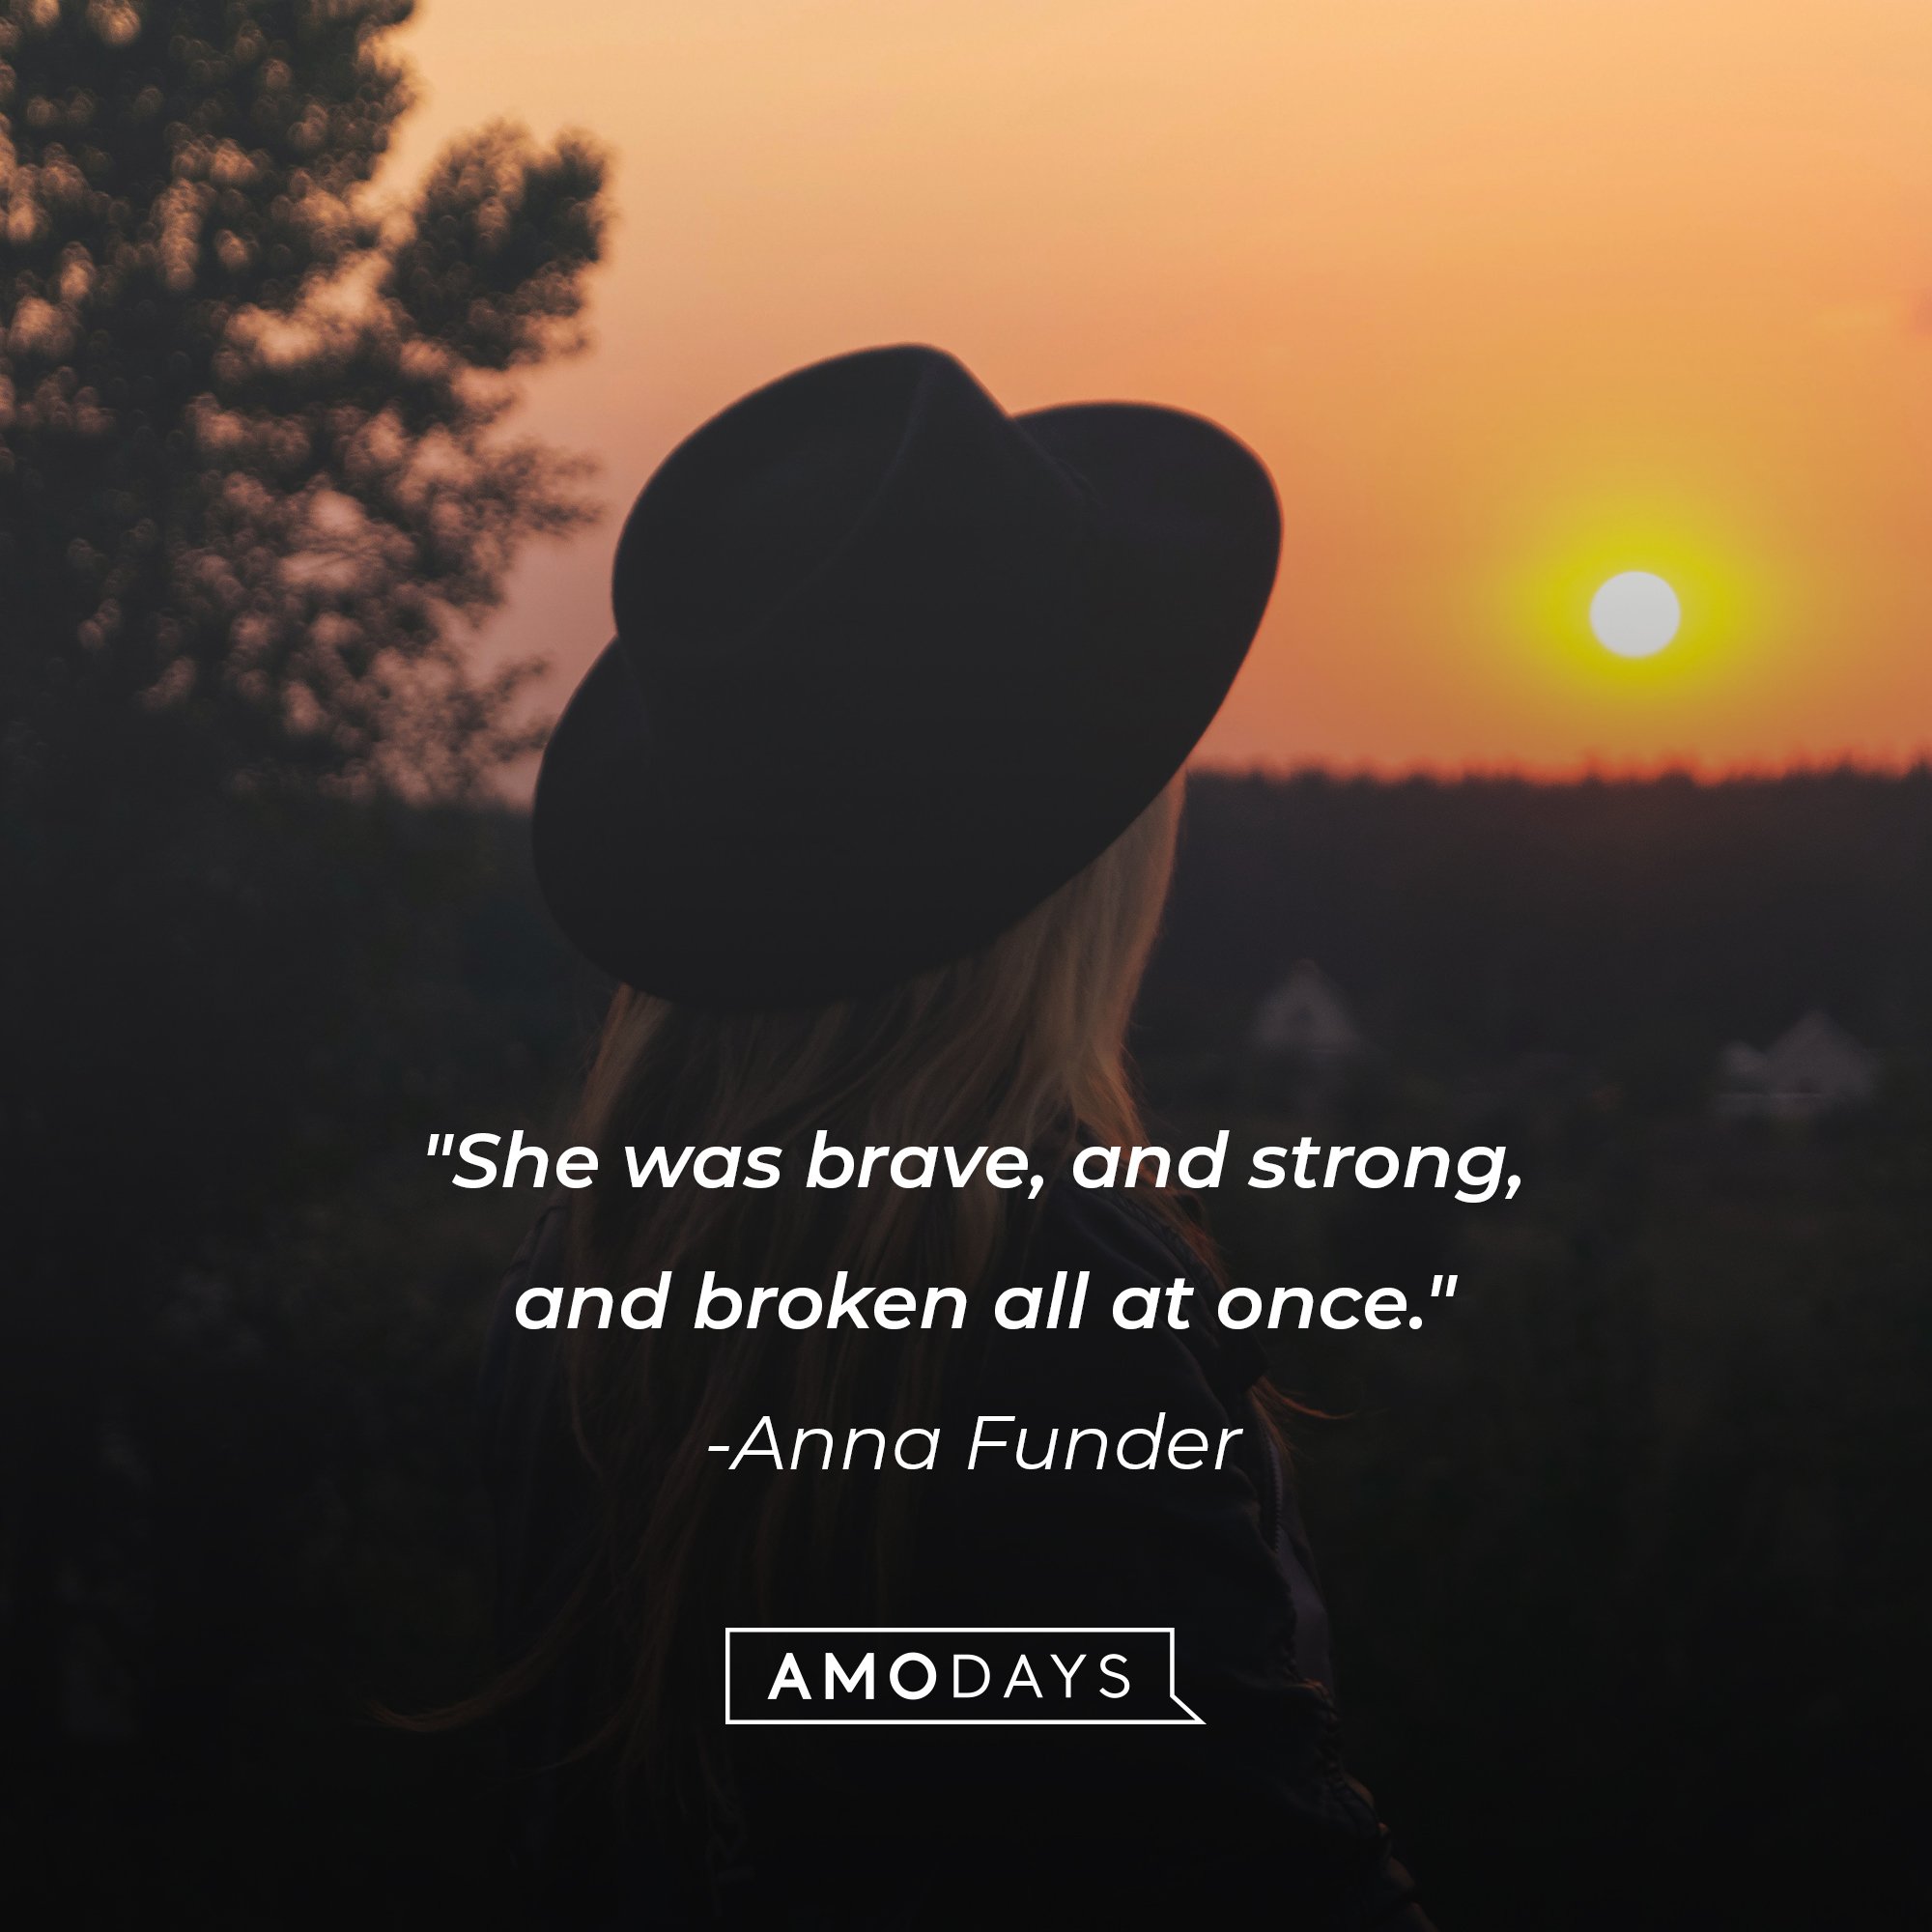 Anna Funder’s quote: "She was brave, and strong, and broken all at once." | Image: AmoDays